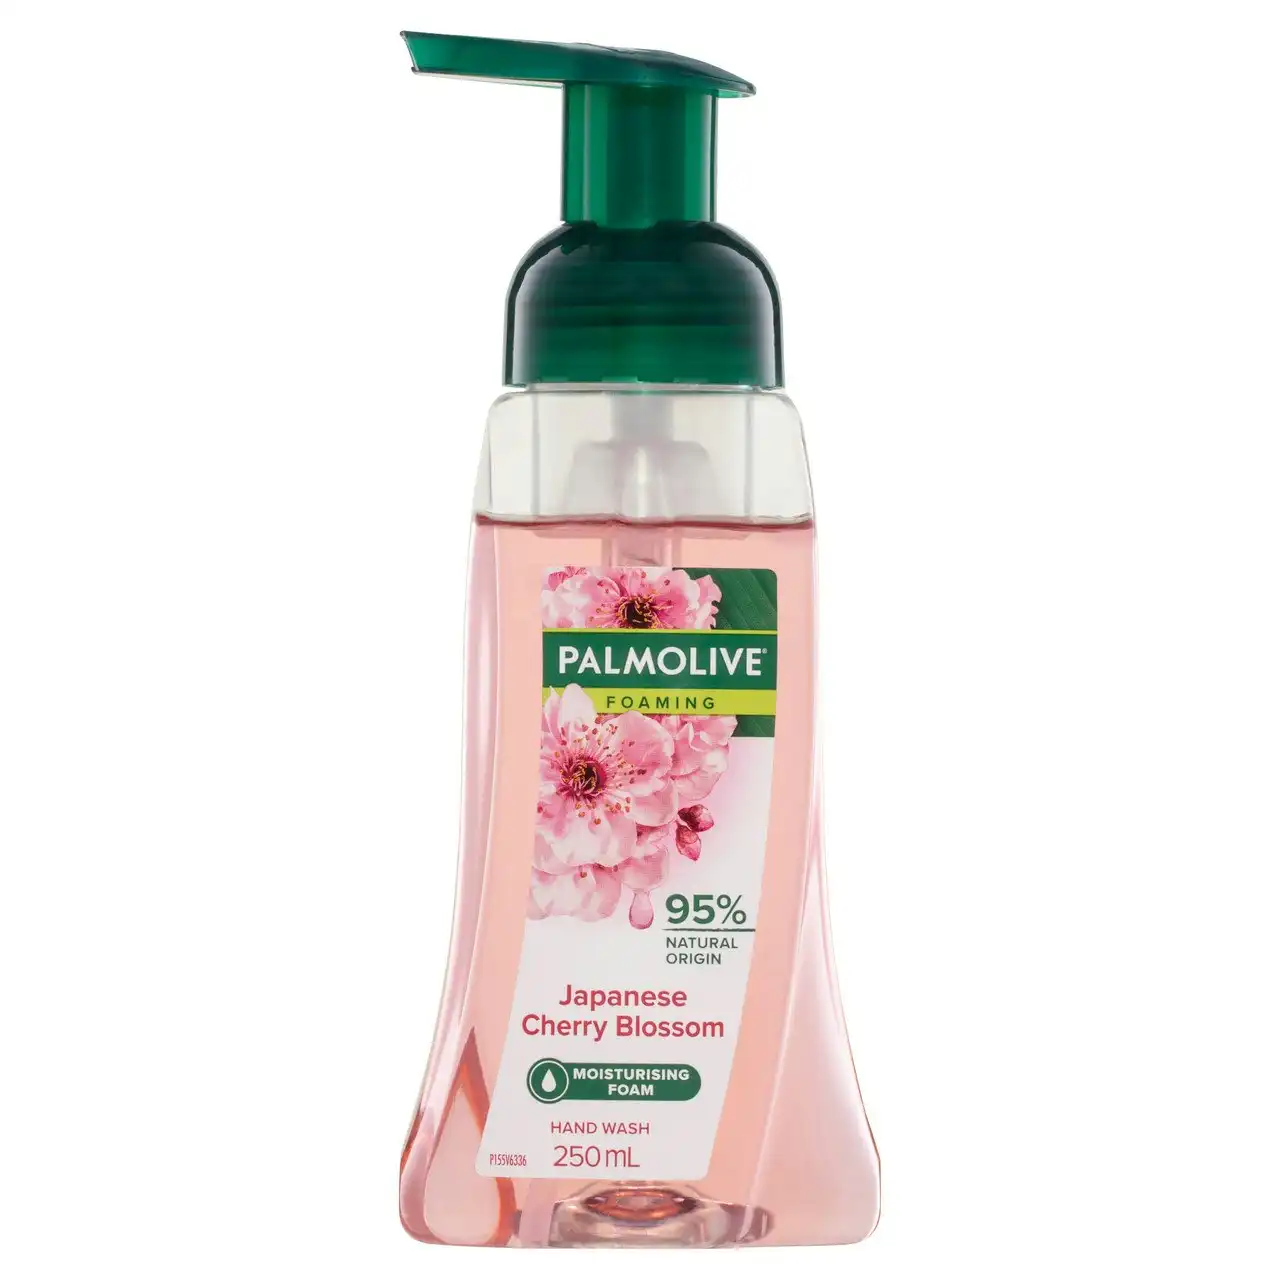 Palmolive Foaming Hand Wash Soap, 250mL, Japanese Cherry Blossom Pump, No Parabens Phthalates or Alcohol